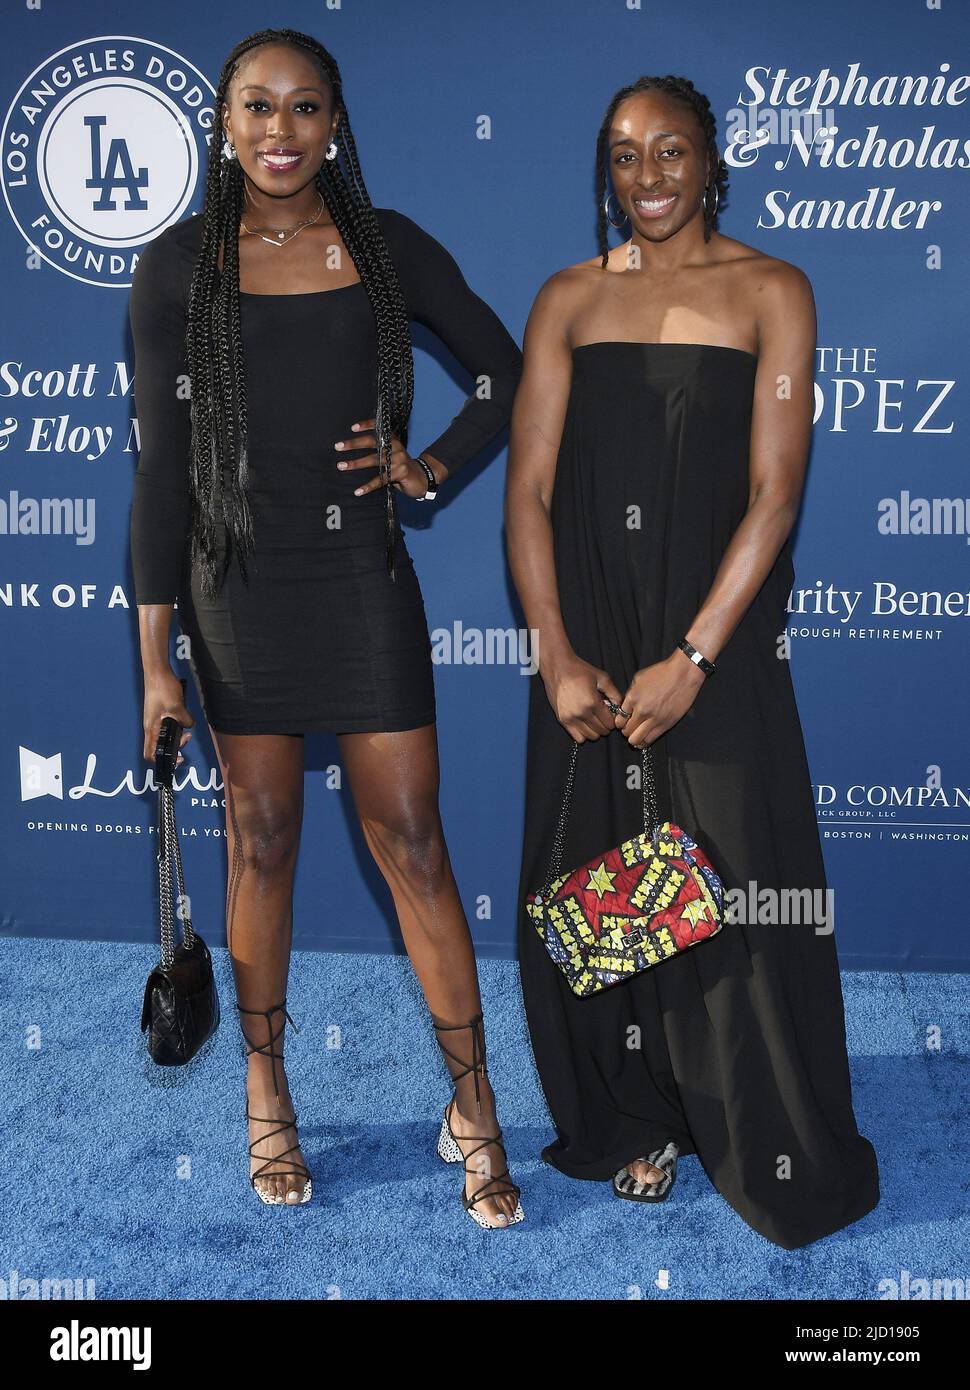 Los Angeles, USA. 16th June, 2022. (L-R) Chiney Ogwumike and Nneka Ogwumike at the Los Angeles Dodgers Foundation 6th Annual Blue Diamond Gala held at the Dodger Stadium in Los Angeles, CA on Thursday, ?June 16, 2022. (Photo By Sthanlee B. Mirador/Sipa USA) Credit: Sipa USA/Alamy Live News Stock Photo